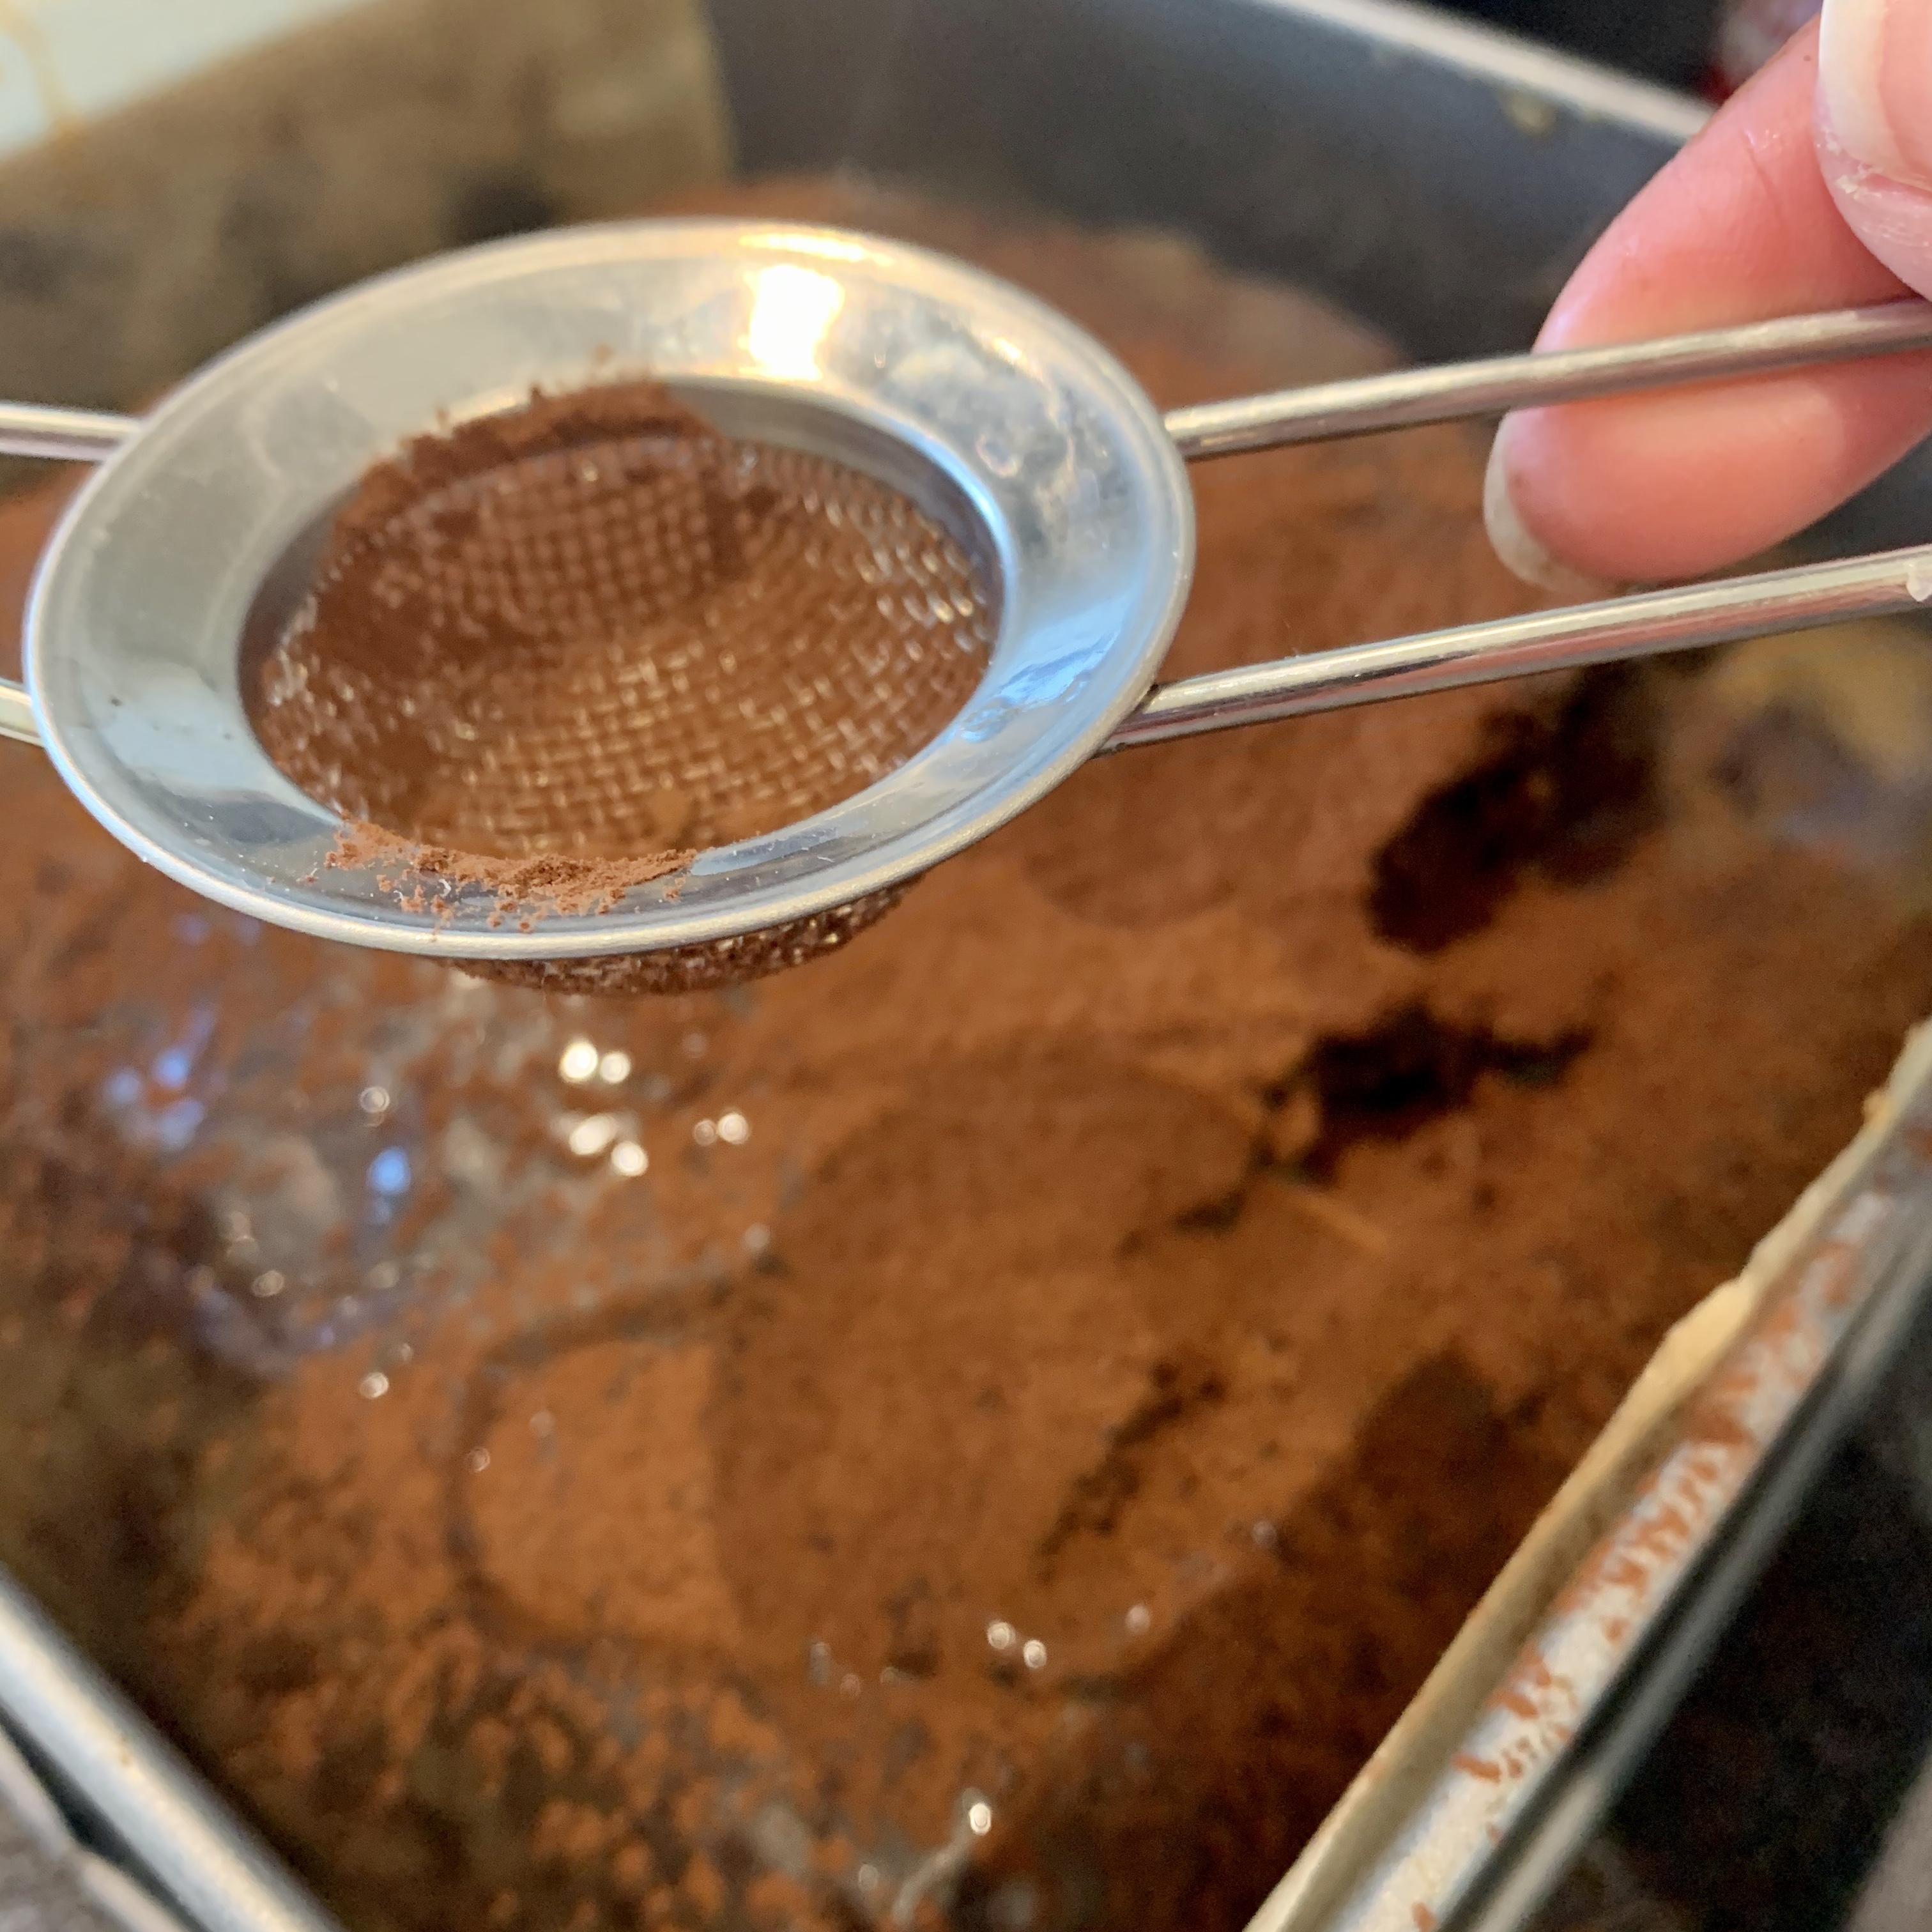 sieving cocoa powder over the cake